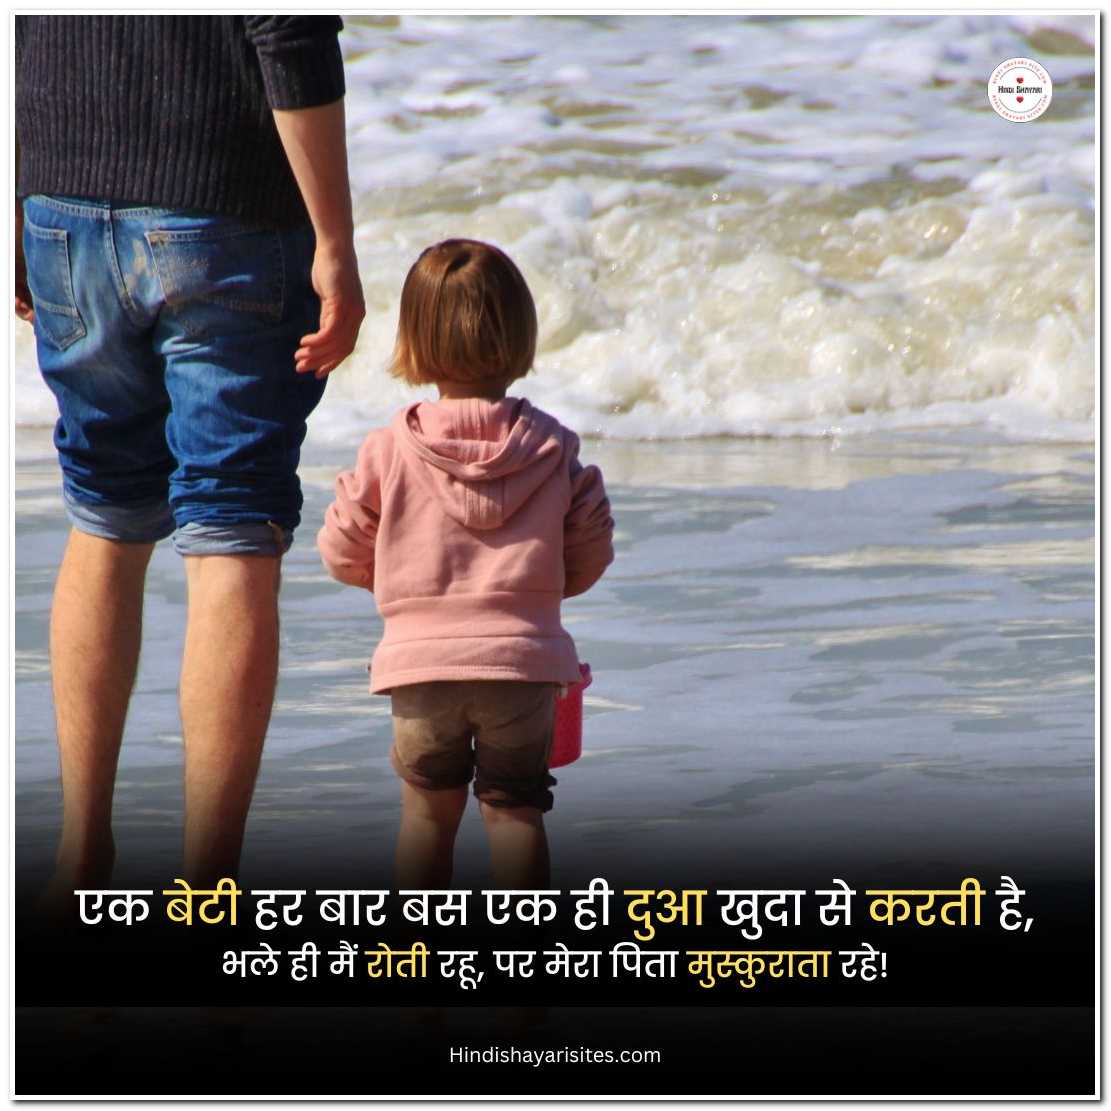 Papa Beti Images With Quotes